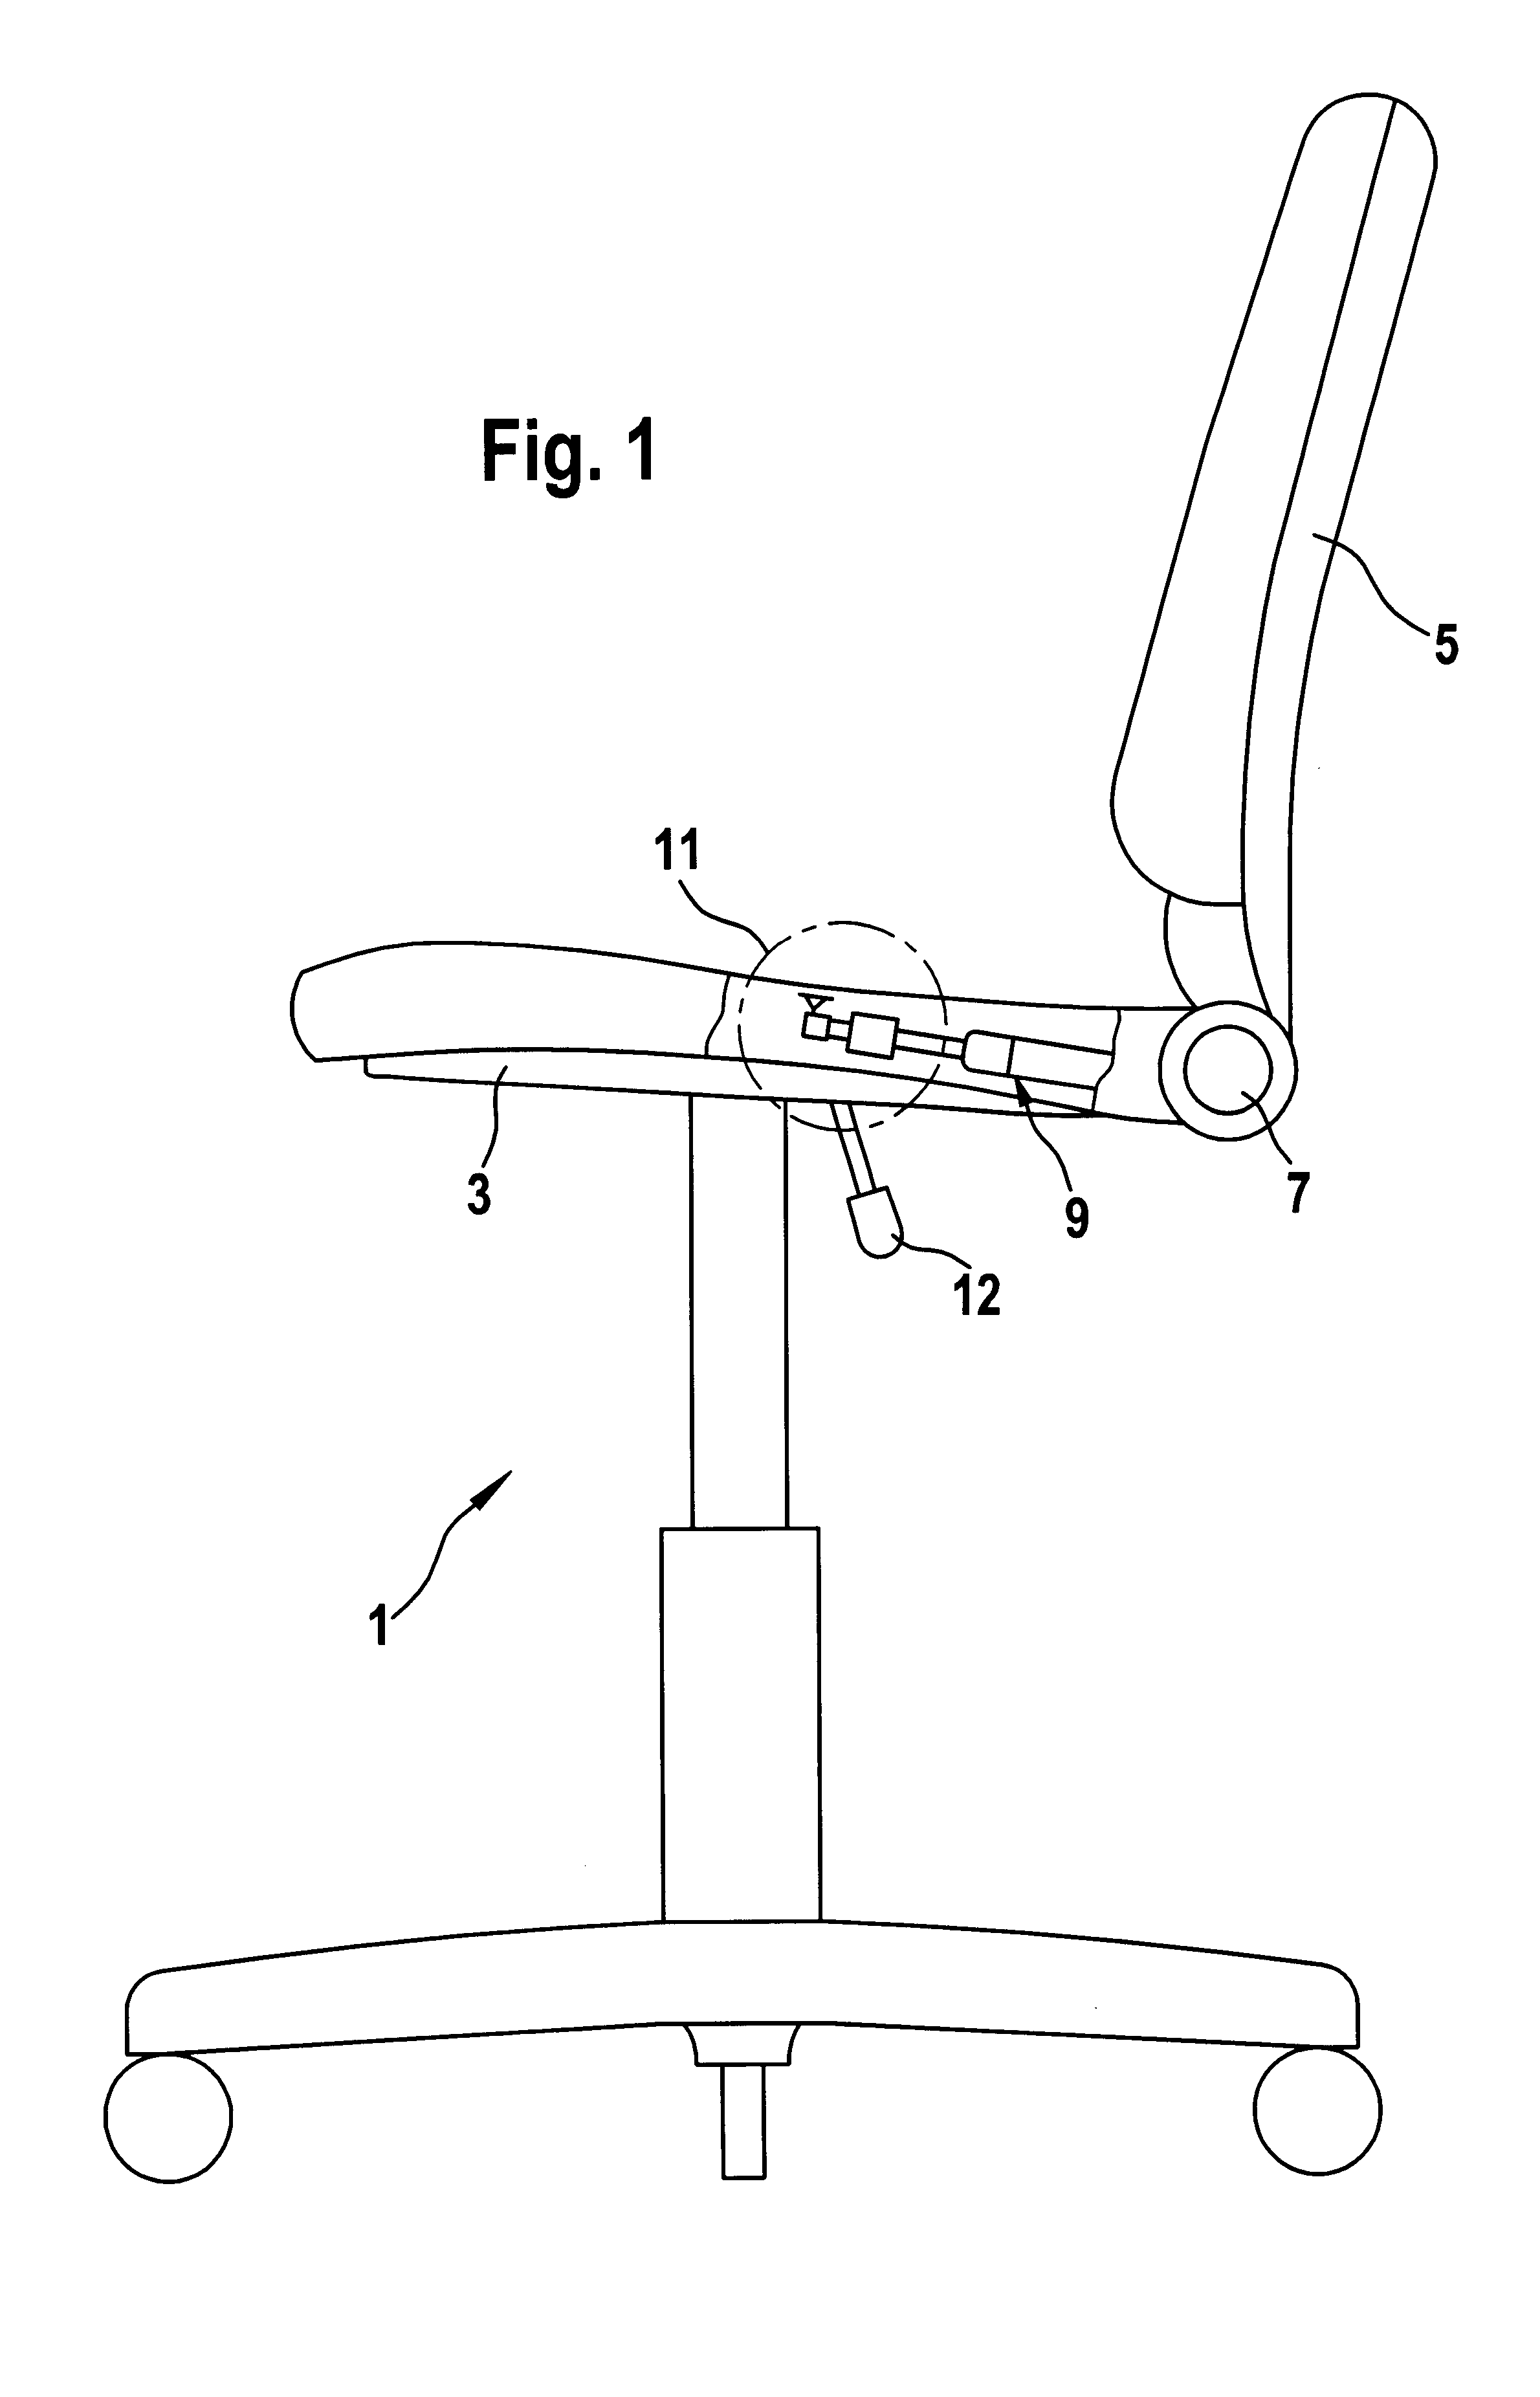 Activation device for a piston/cylinder unit